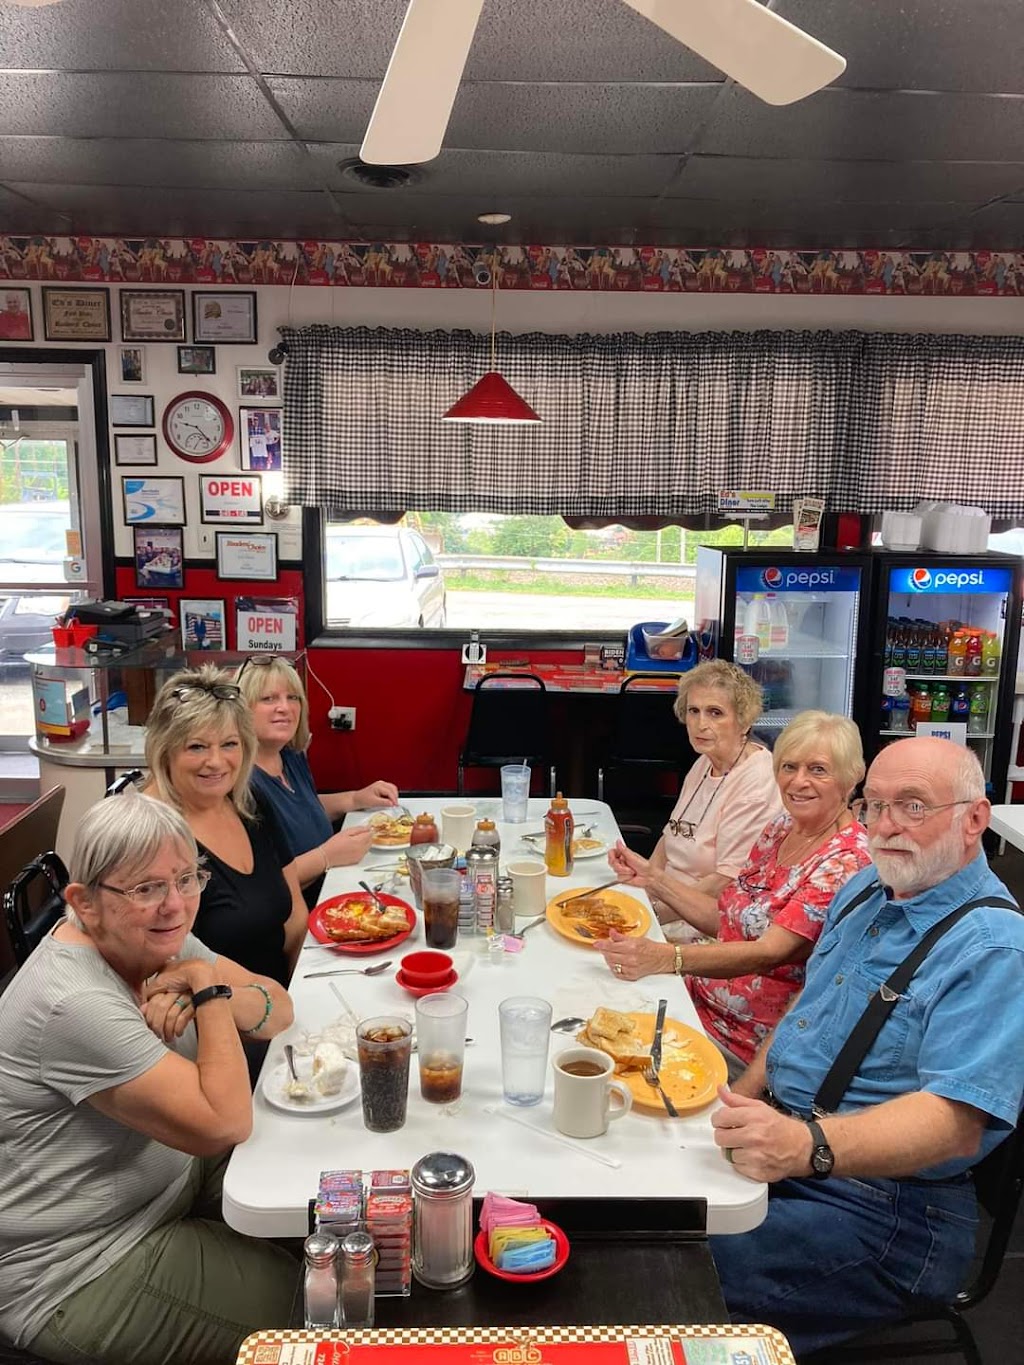 Eds Diner | 1607 Morrell Ave, Connellsville, PA 15425, USA | Phone: (724) 628-7029